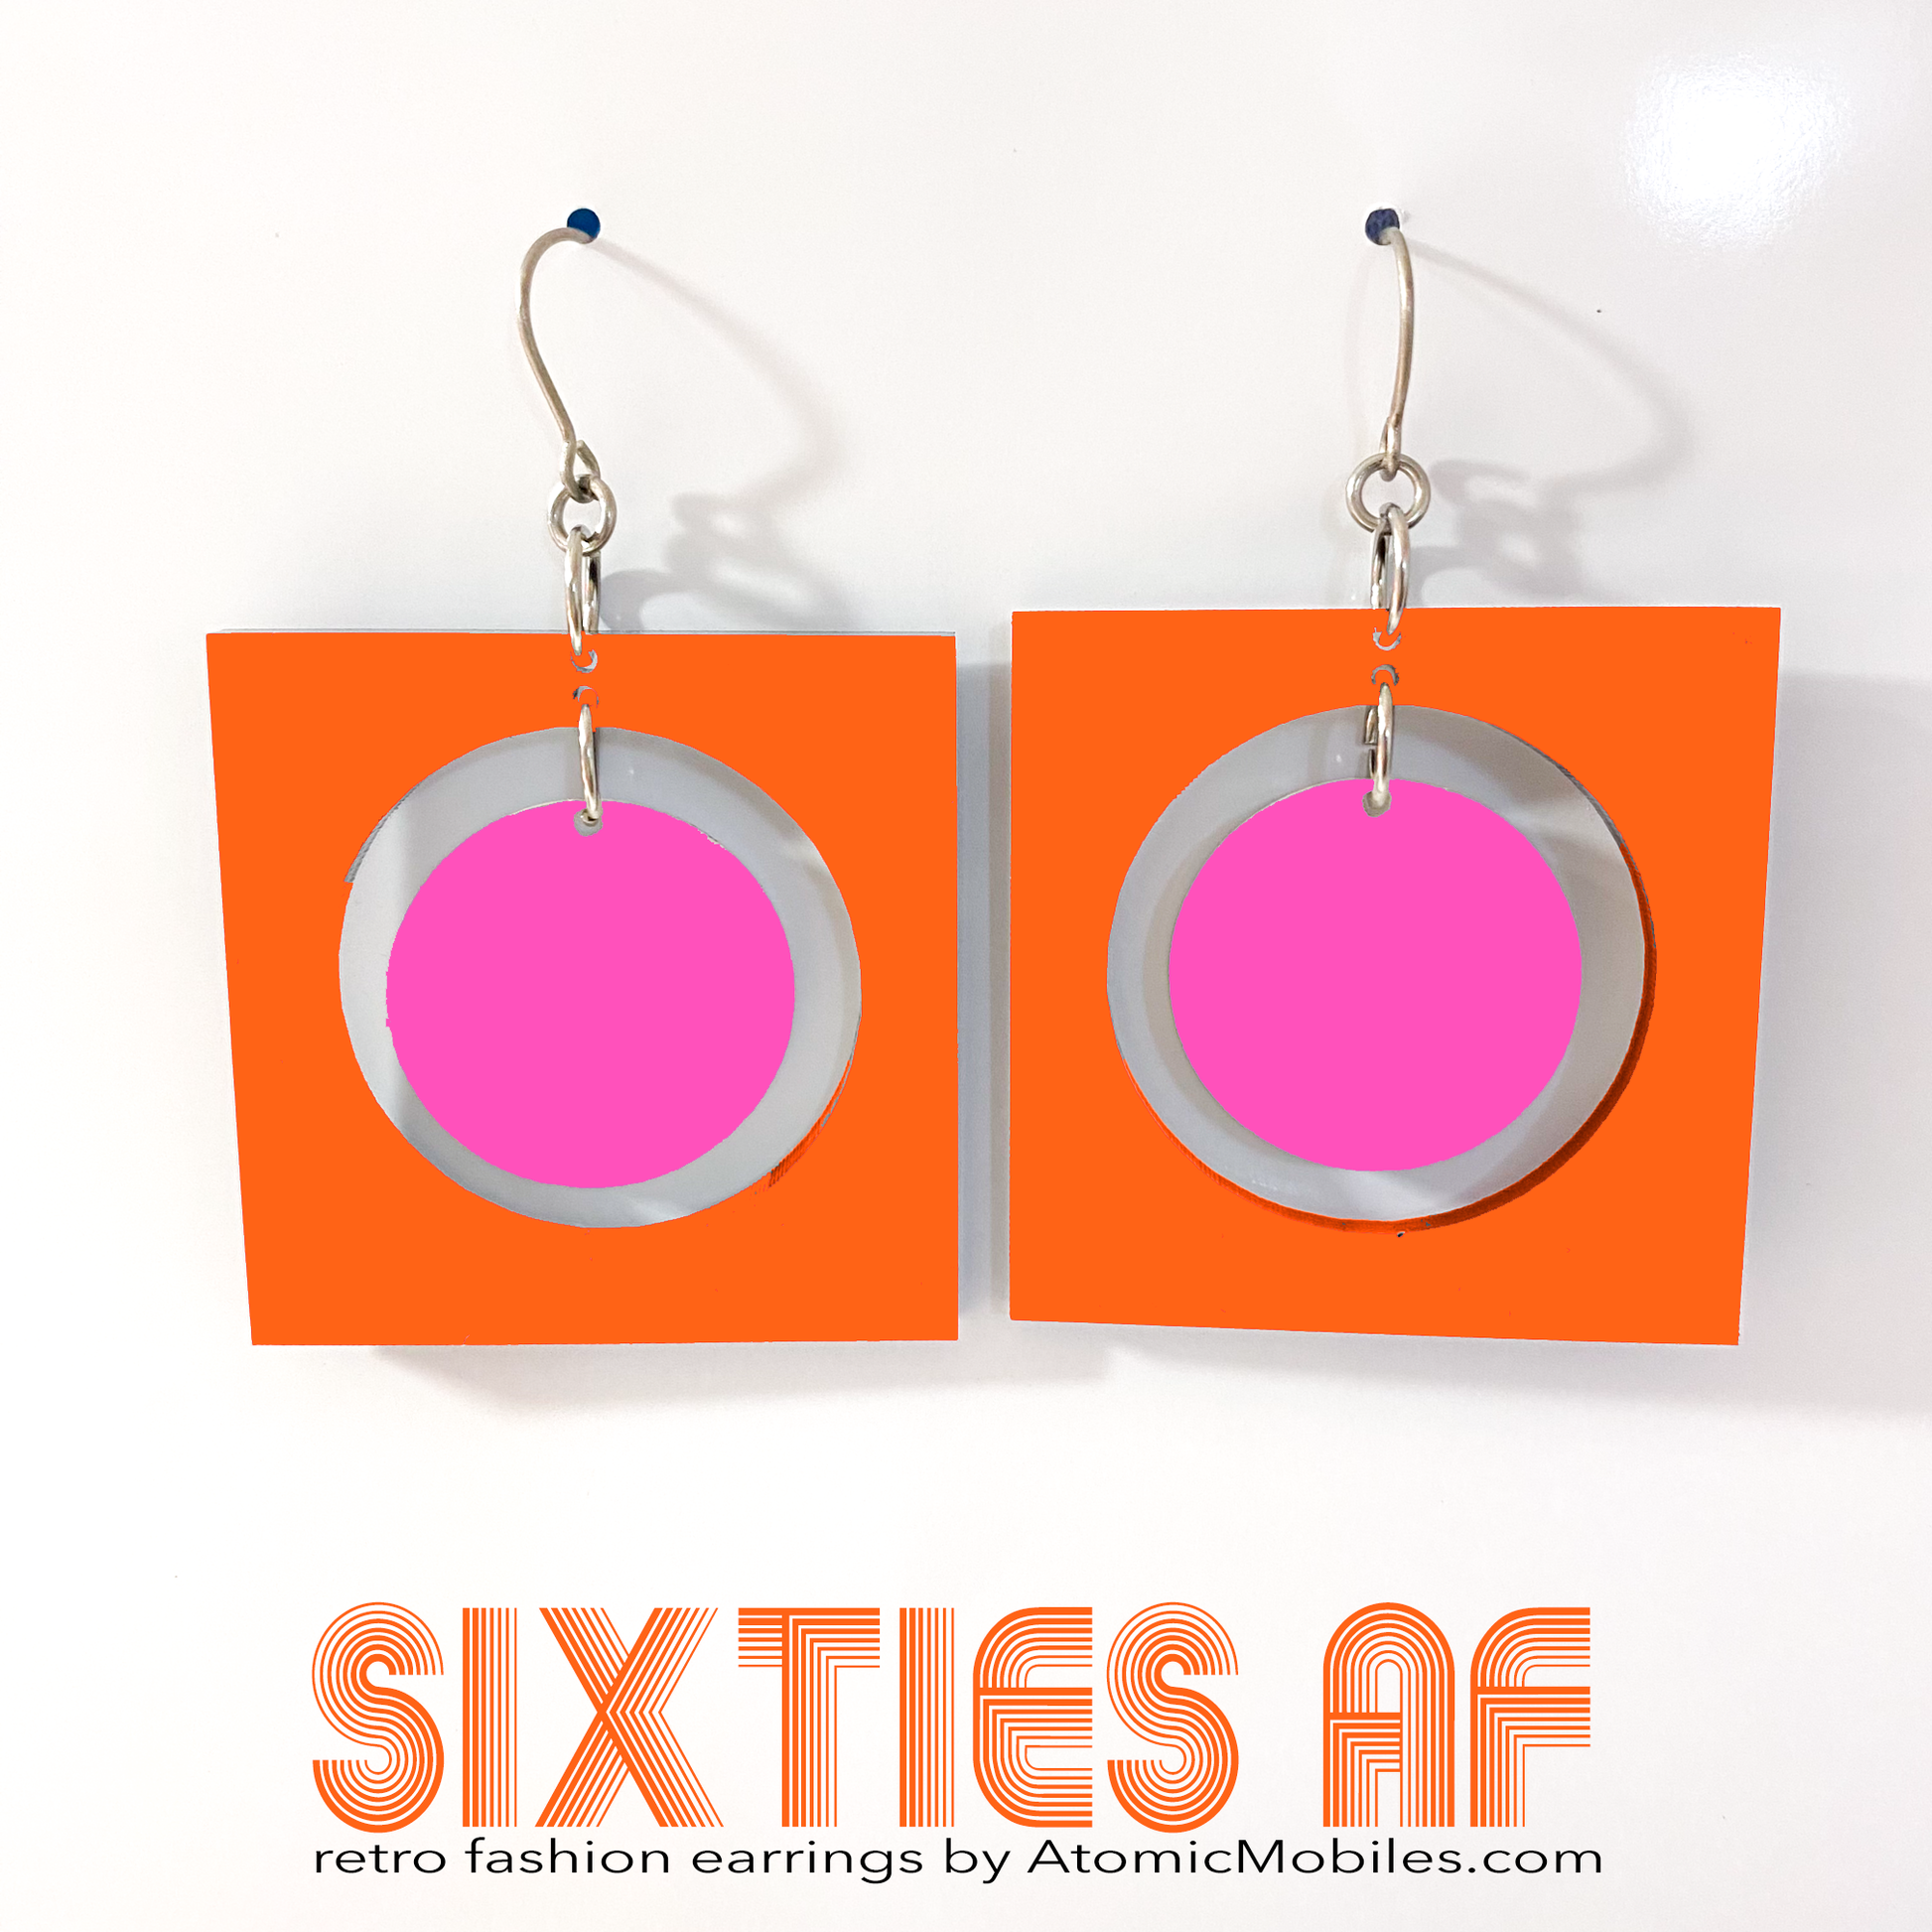 SIXTIES AF groovy retro fashion earrings inspired by the 1960s in orange and hot pink - by AtomicMobiles.com